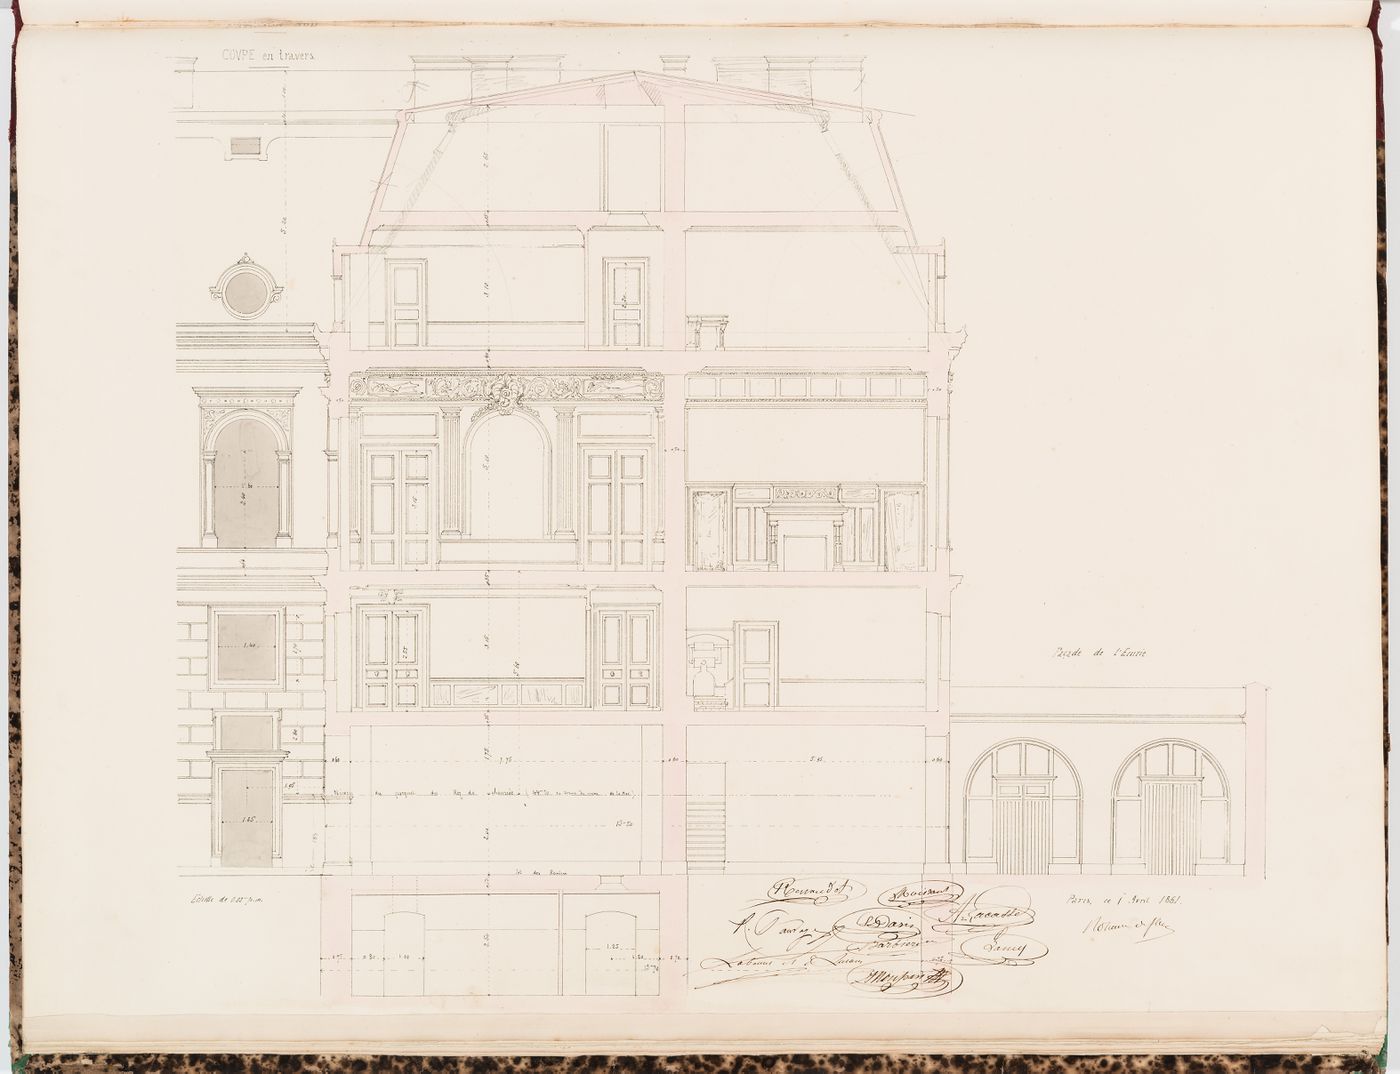 Cross section through the "pavillon sud", including an elevation for the stables and a partial elevation for the entrance façade, Hôtel Sauvage, Paris